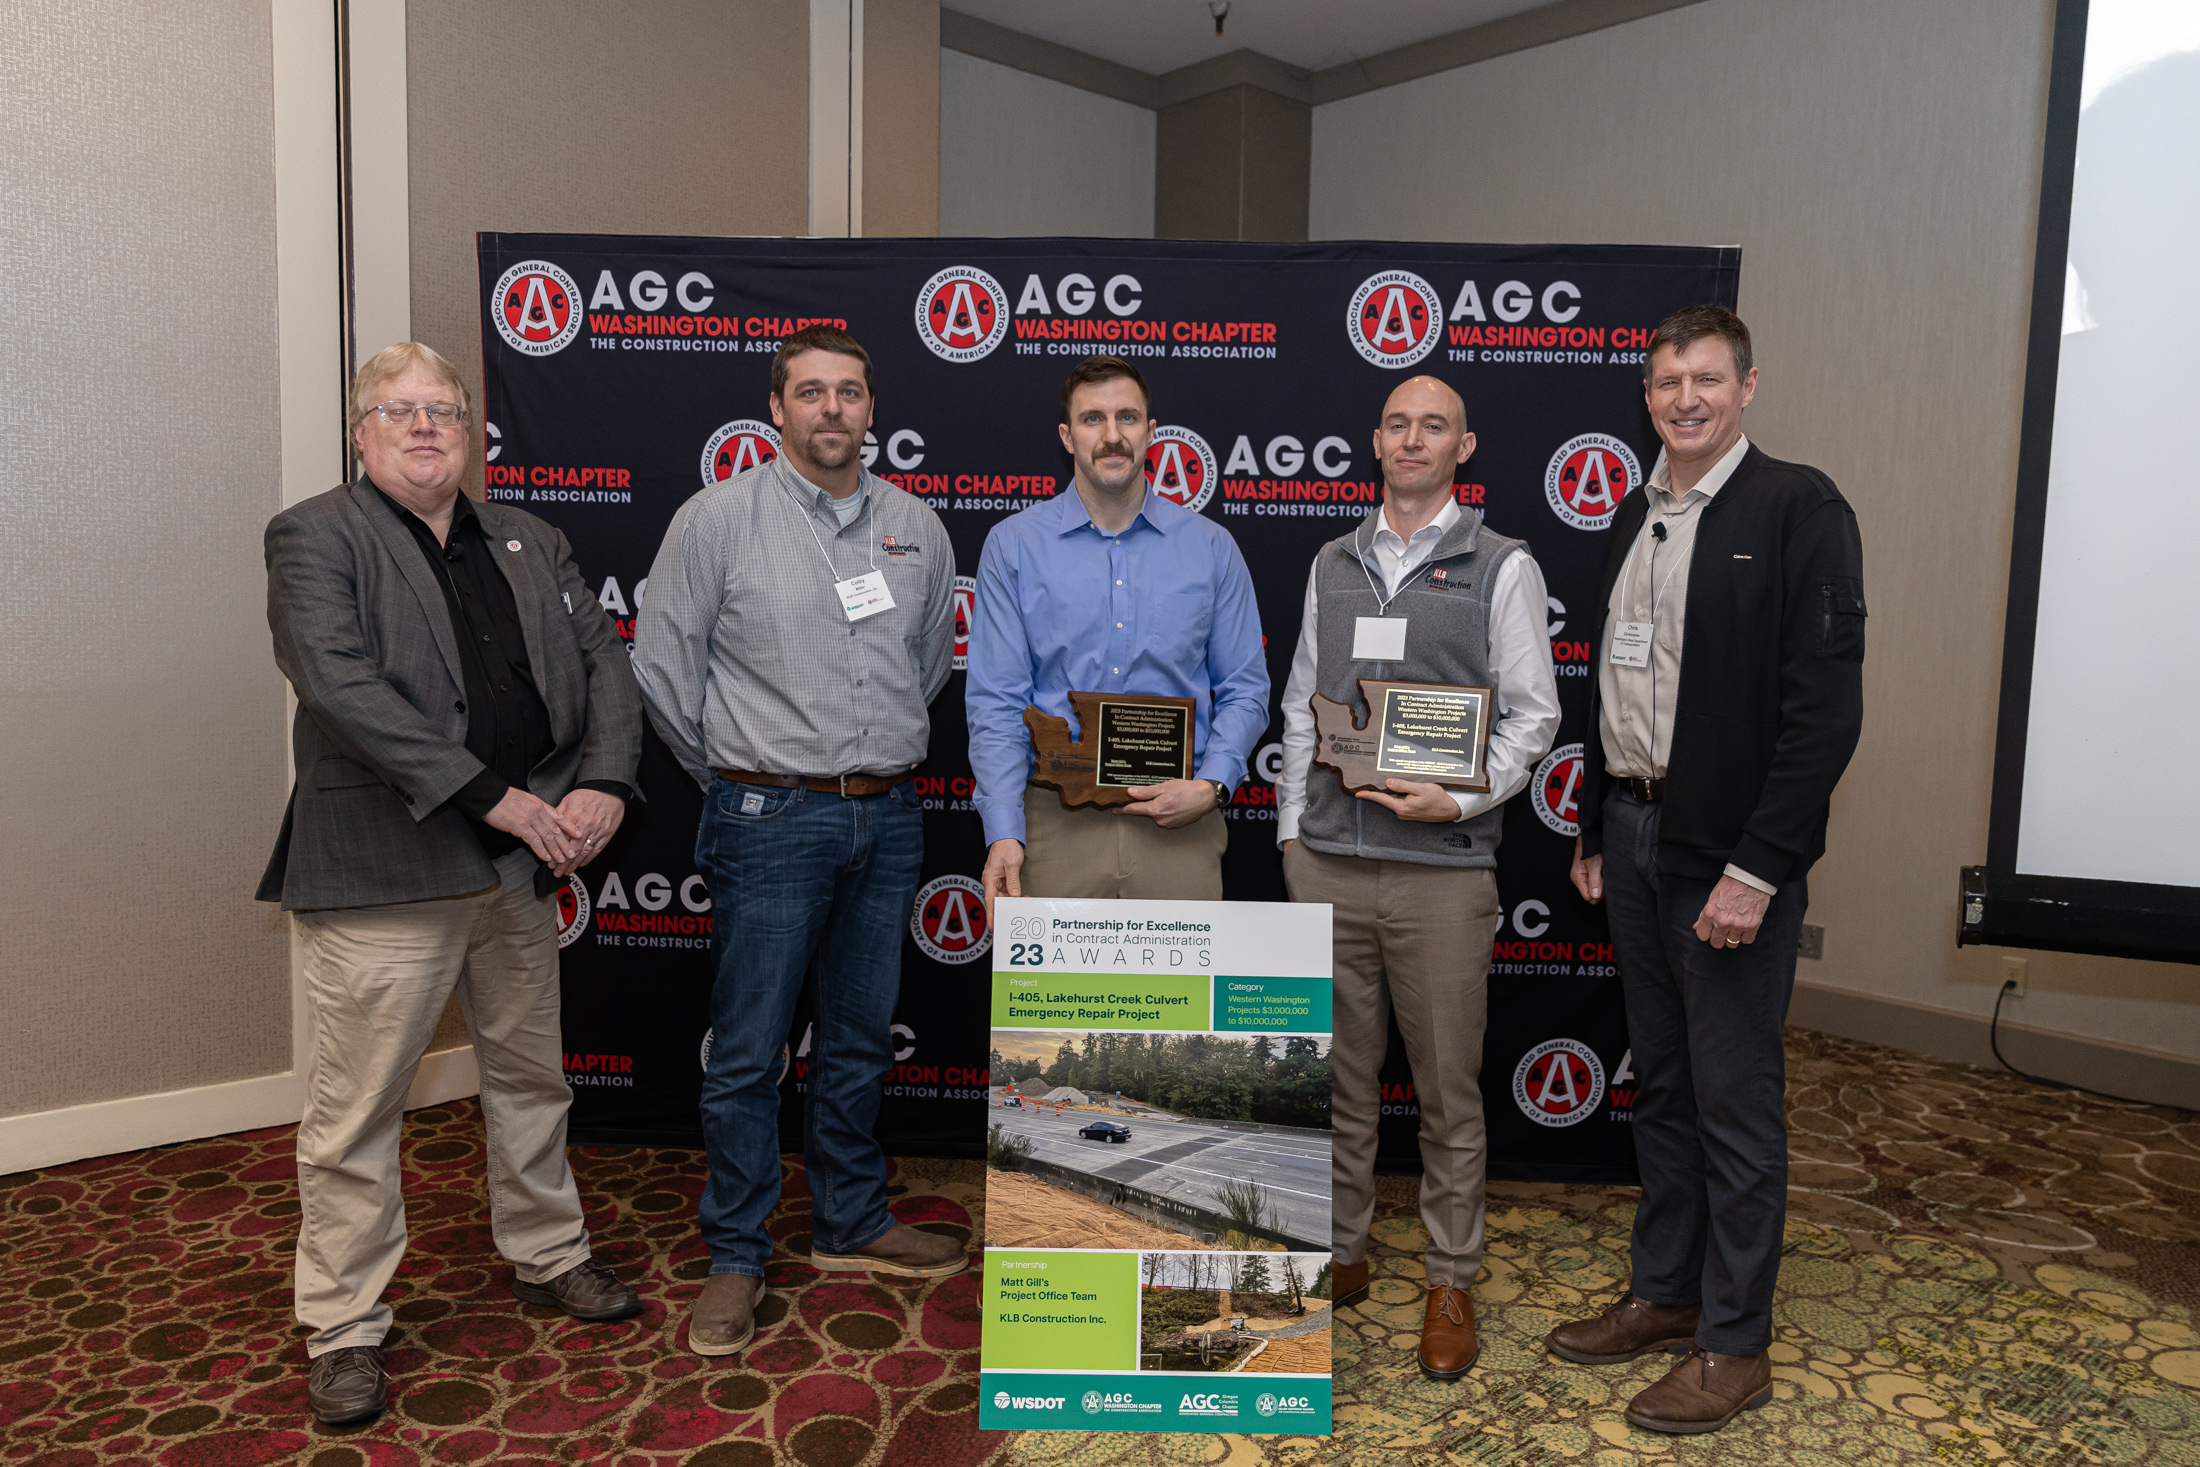 Five people, two of whom are holding award plaques, standing in front of an AGC Washington Chapter backdrop.